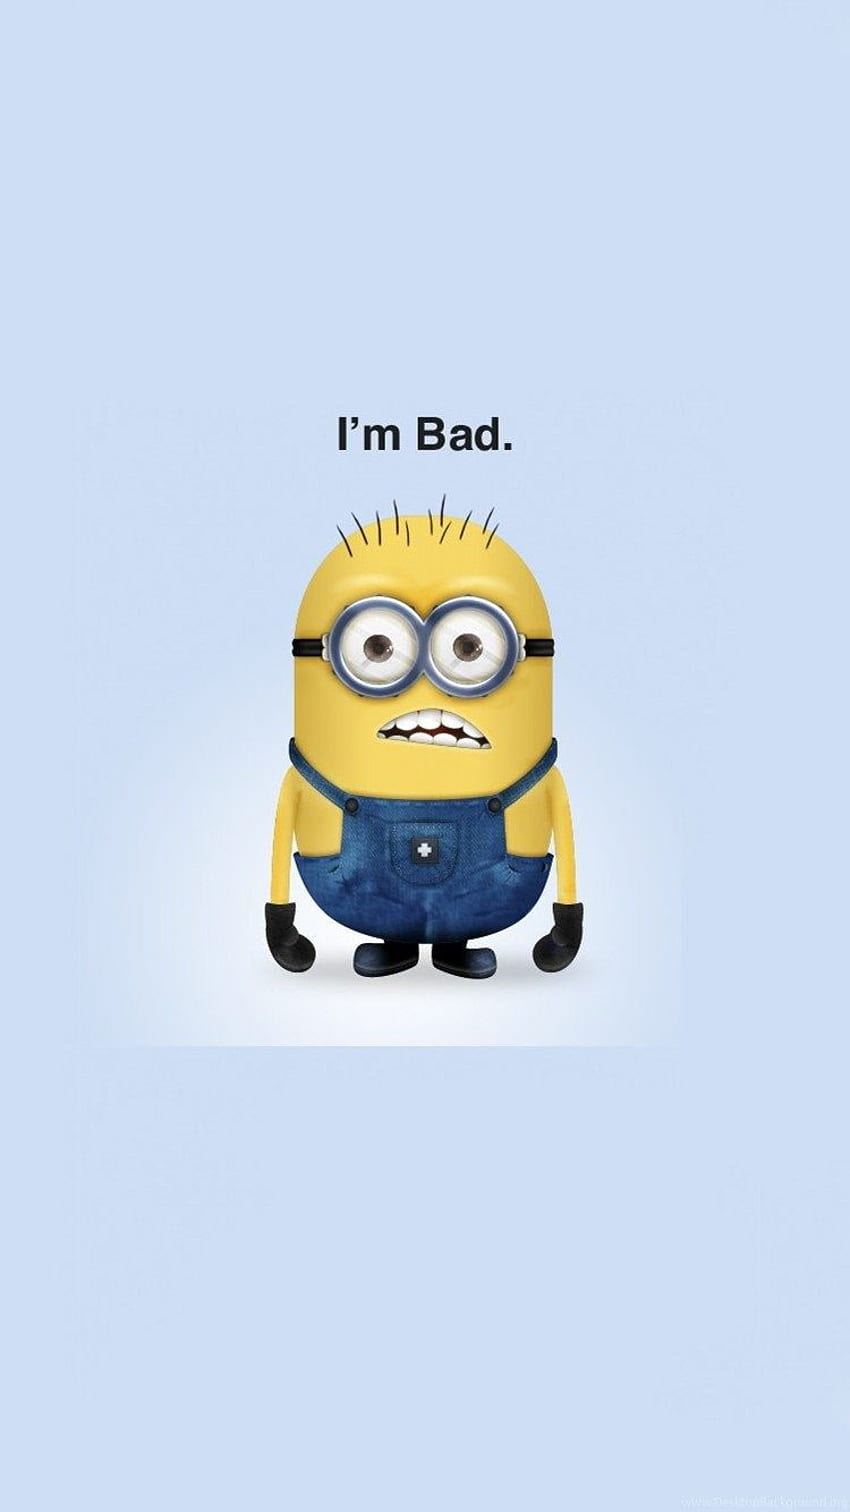 I'm Bad Quote Minion iPhone 6 For 2015 Halloween HD phone wallpaper